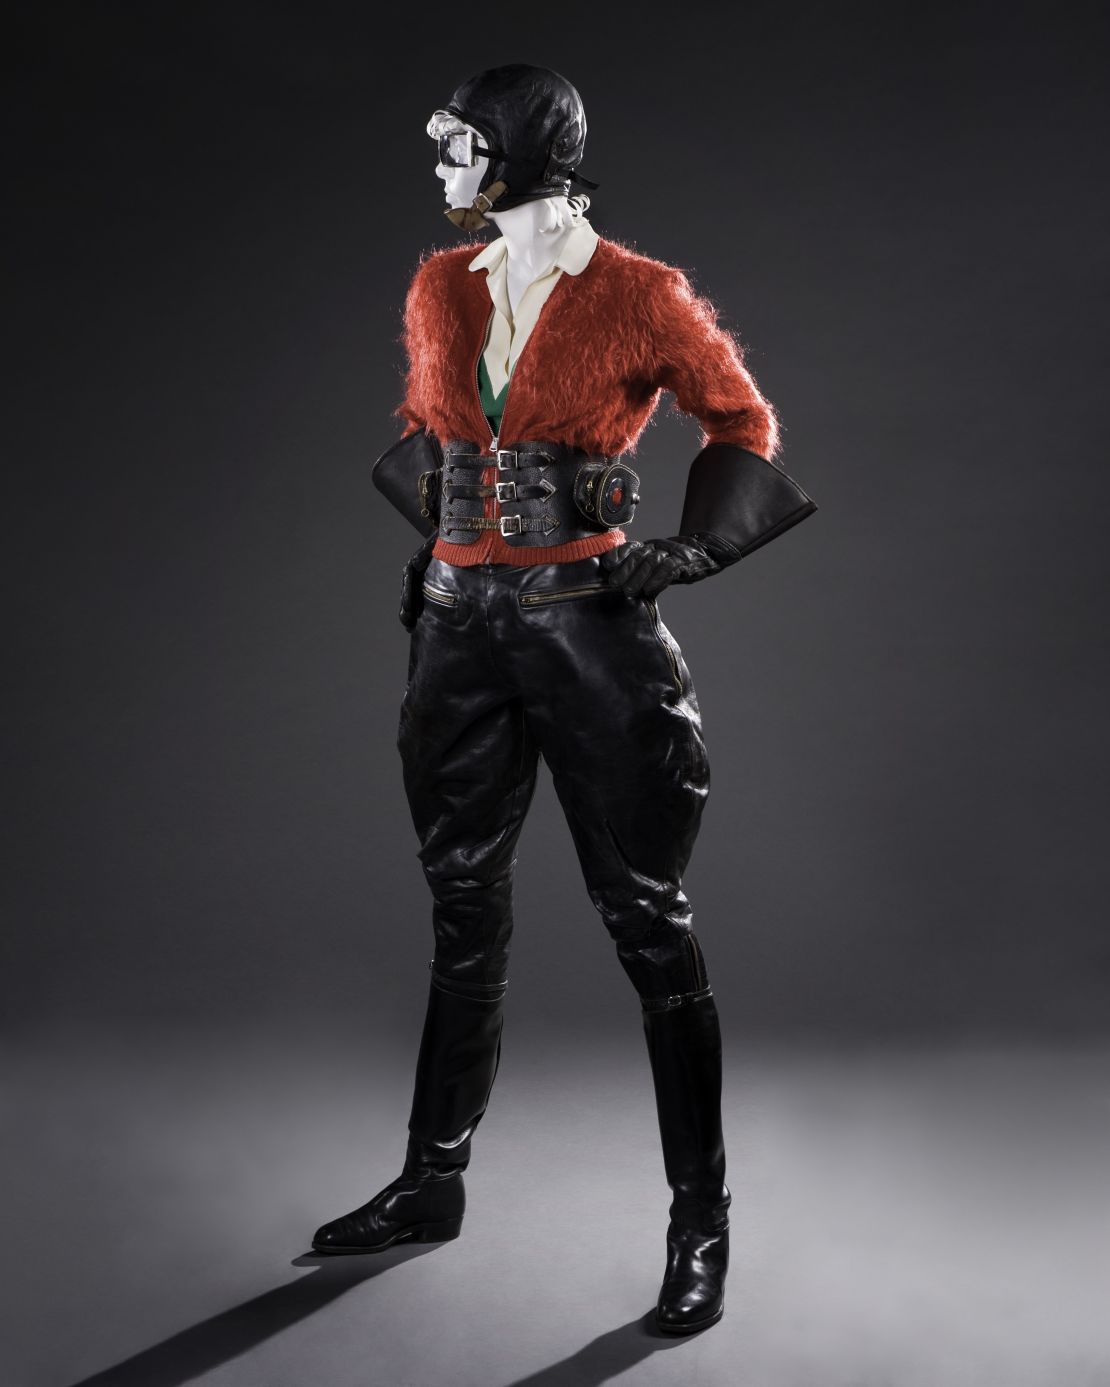 A sporty motorcycling outfit from the 1930s.